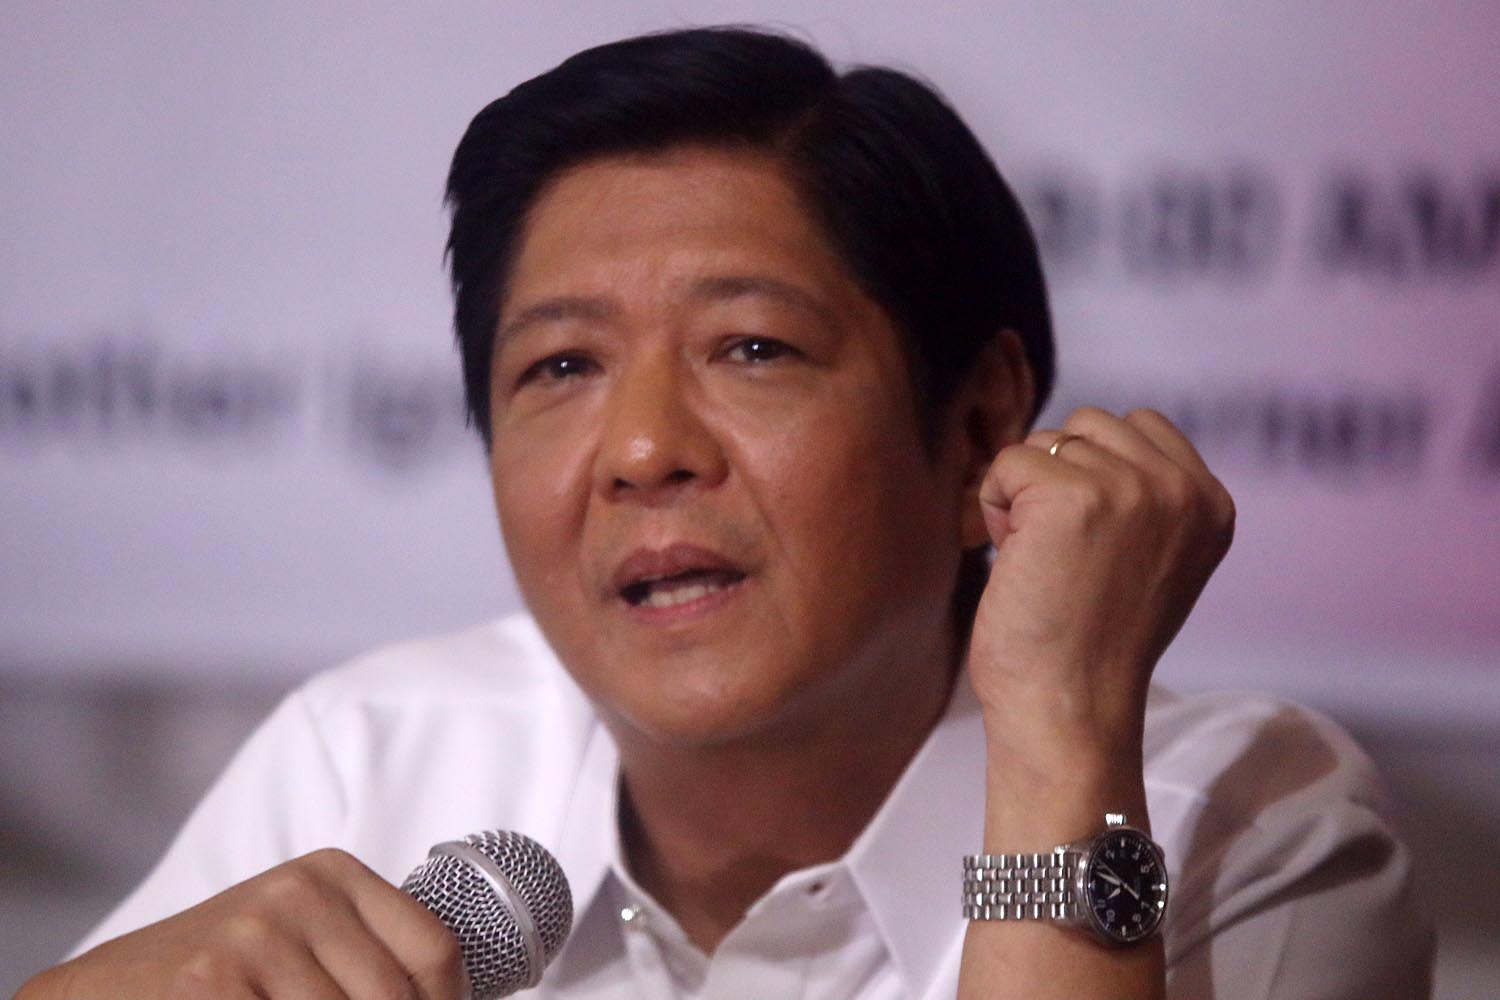 'MARTIAL LAW IS OVER.' Ex-senator Bongbong Marcos speaks during a media forum in Quezon City on August 24, 2018. Photo by Darren Langit/Rappler 